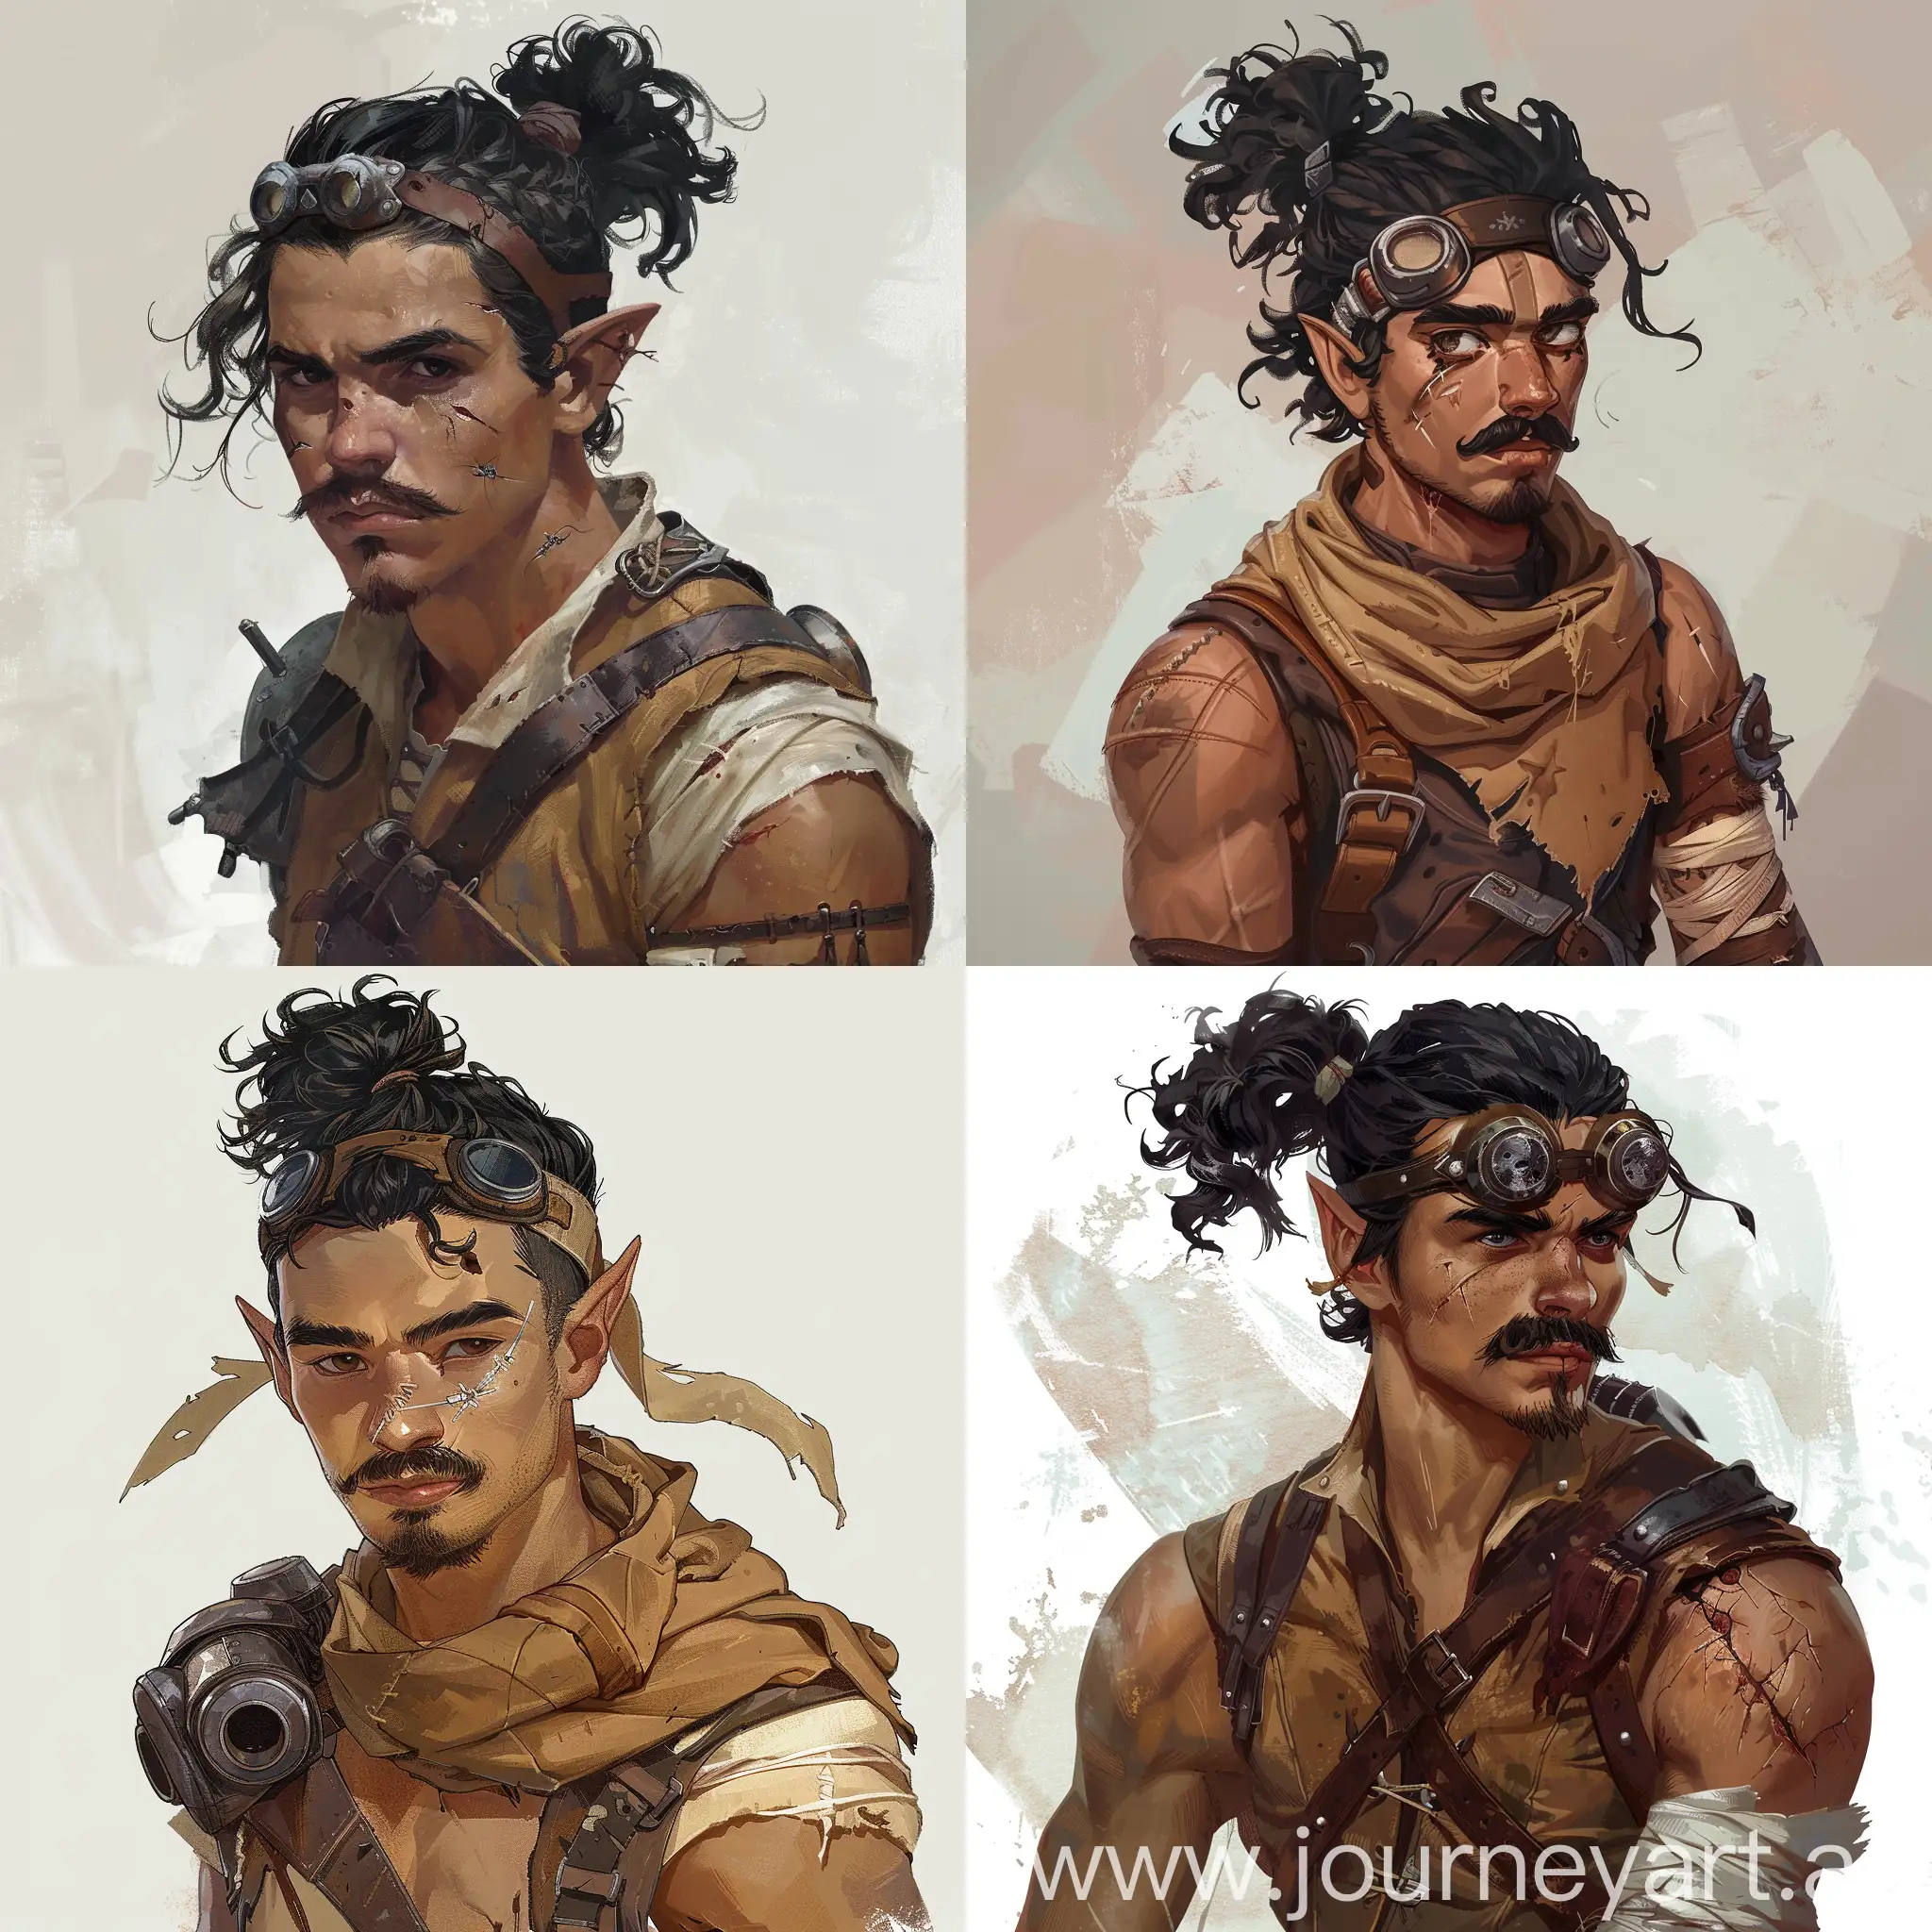 A young human for D&D. he has a black hair tied in a ponytail, a curled mustache and a goatee. he wears a brown leather clothing, with broken goggles. He is missing one of his arms, in its place he has just a stump wrapped in bandages.::